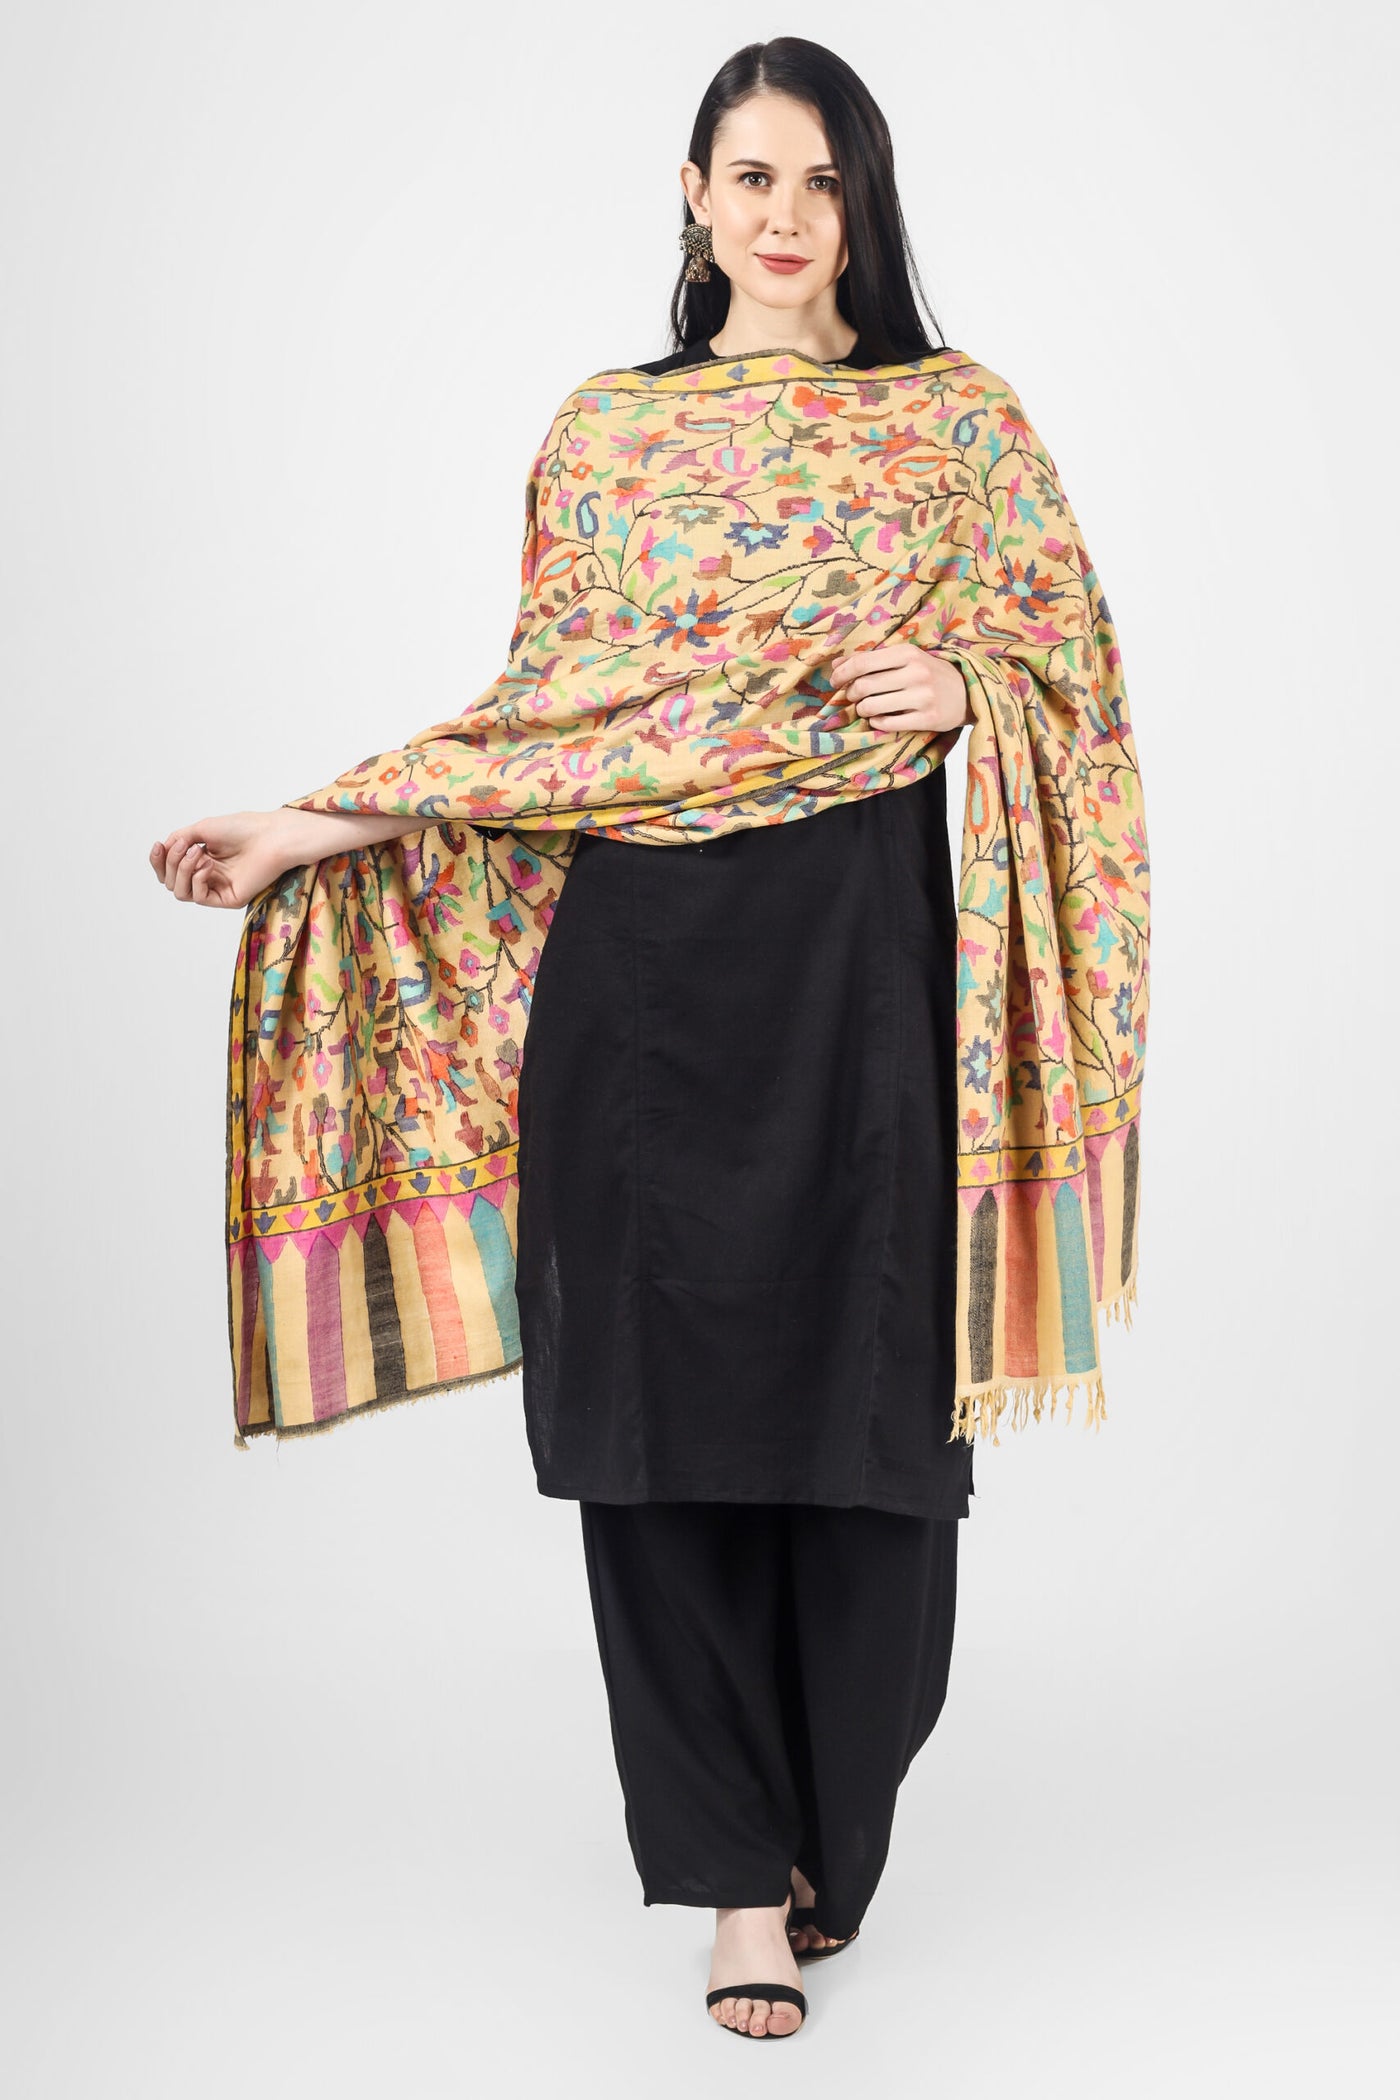 "KANI SHAWL - The Blooming Almond Blossoms Direct from the Alcoves and Gardens of Kashmir  Warm Yellow kani Pashmina Shawl - GREECE - SWEDEN - AUSTRALIA - CANADA - PORTUGAL - DENMARK - MALAYSIA - JAPAN - NORWAY - FINLAND."